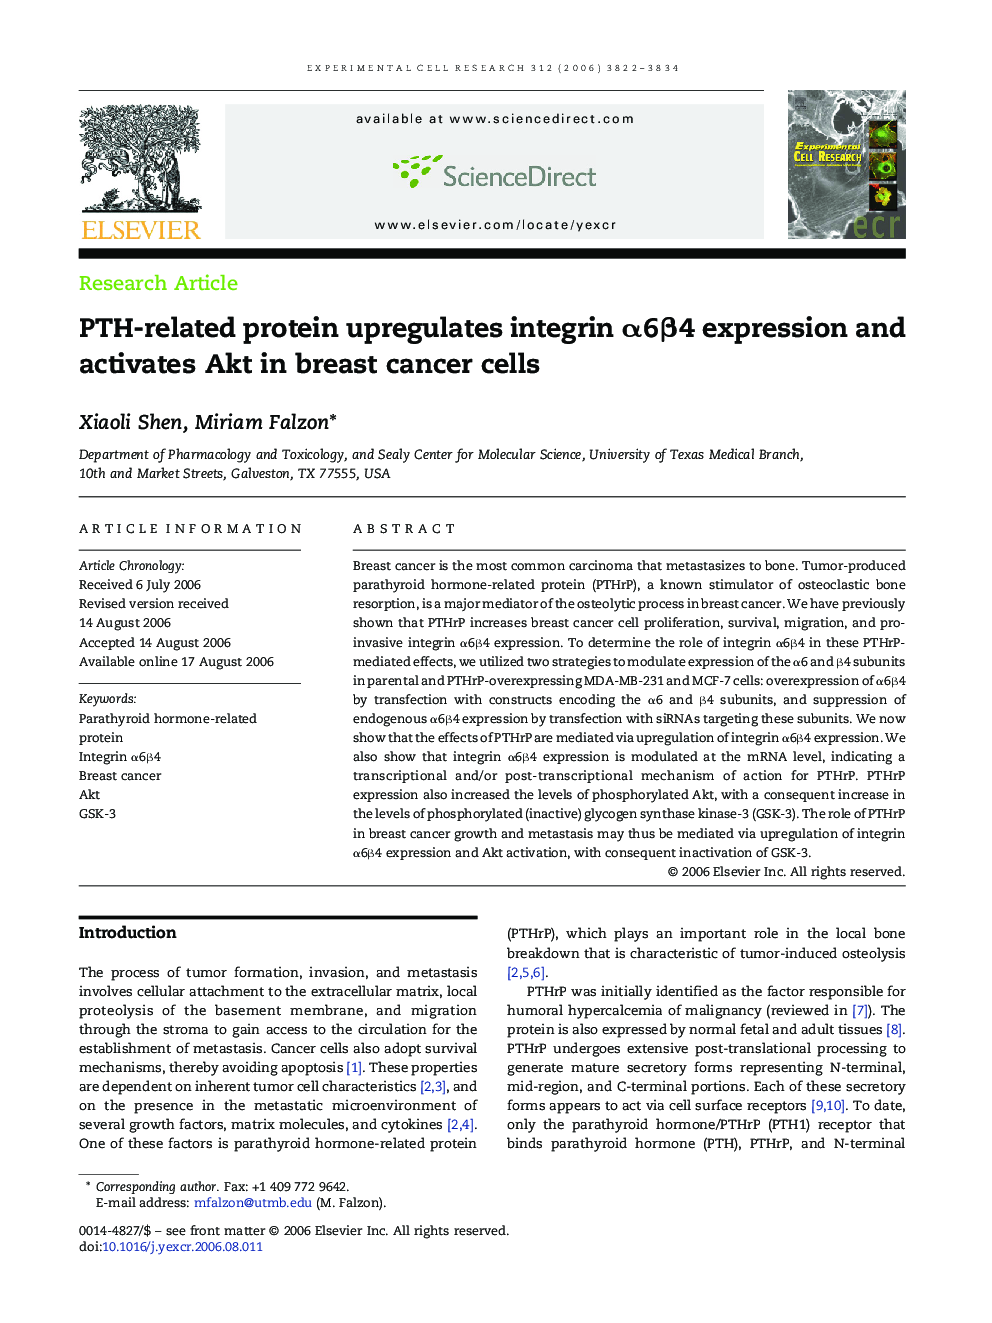 PTH-related protein upregulates integrin α6β4 expression and activates Akt in breast cancer cells